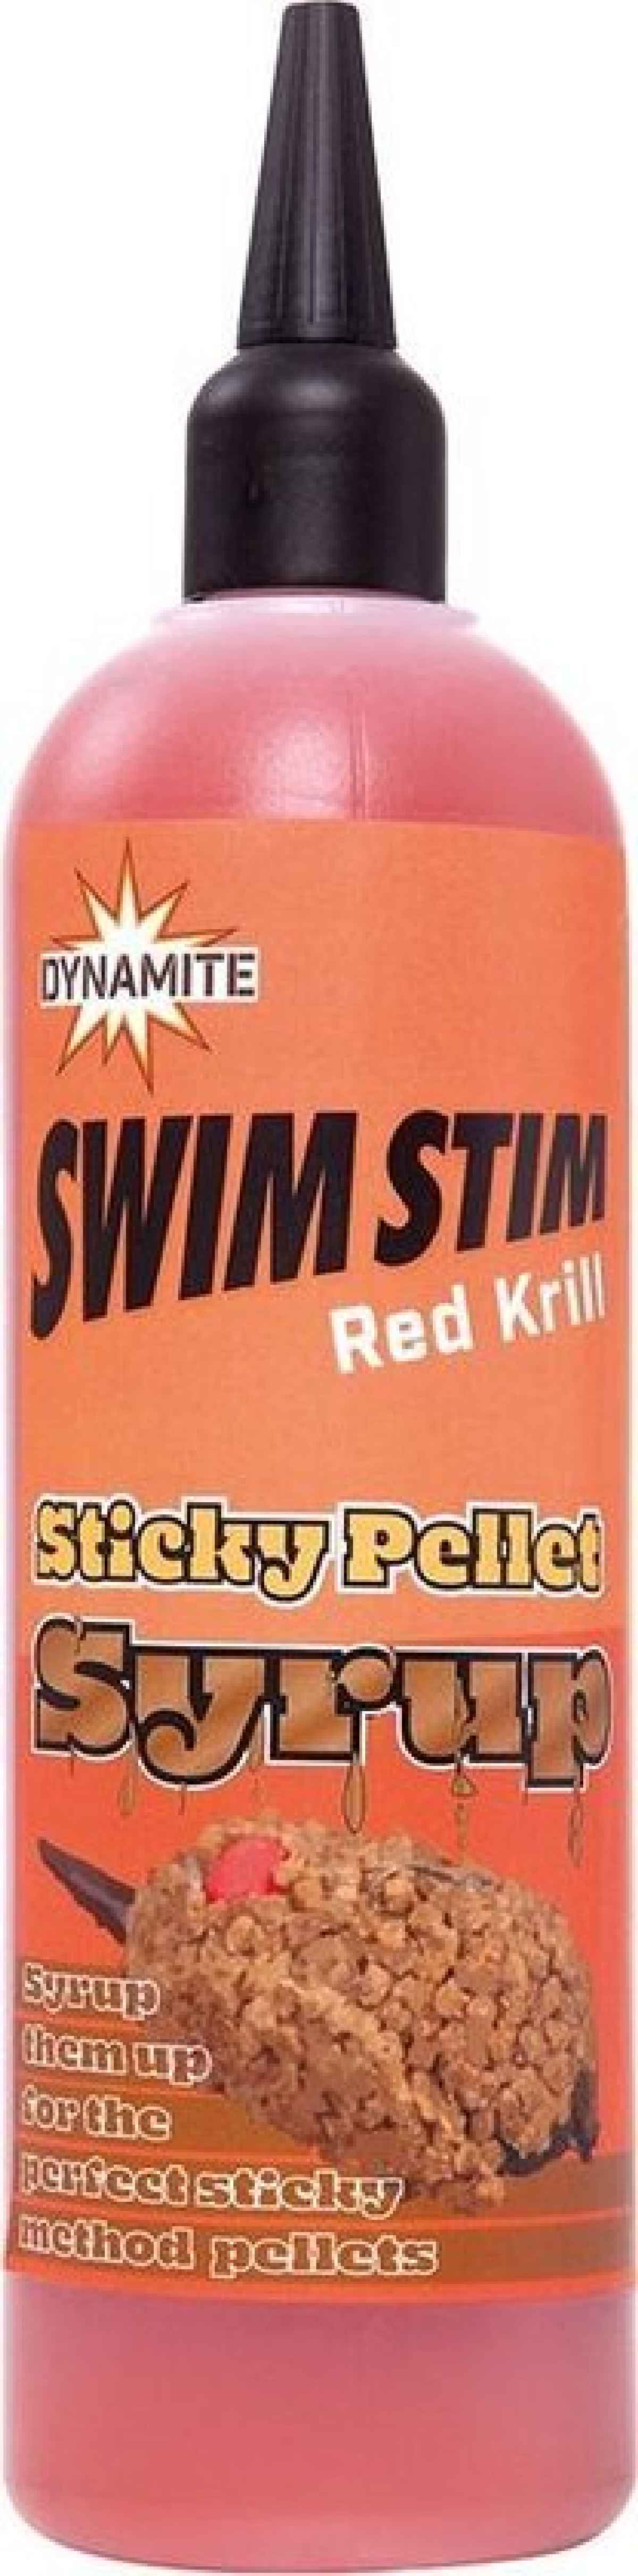 Dynamite Baits Sticky Pellet Syrup 300ML Red Krill